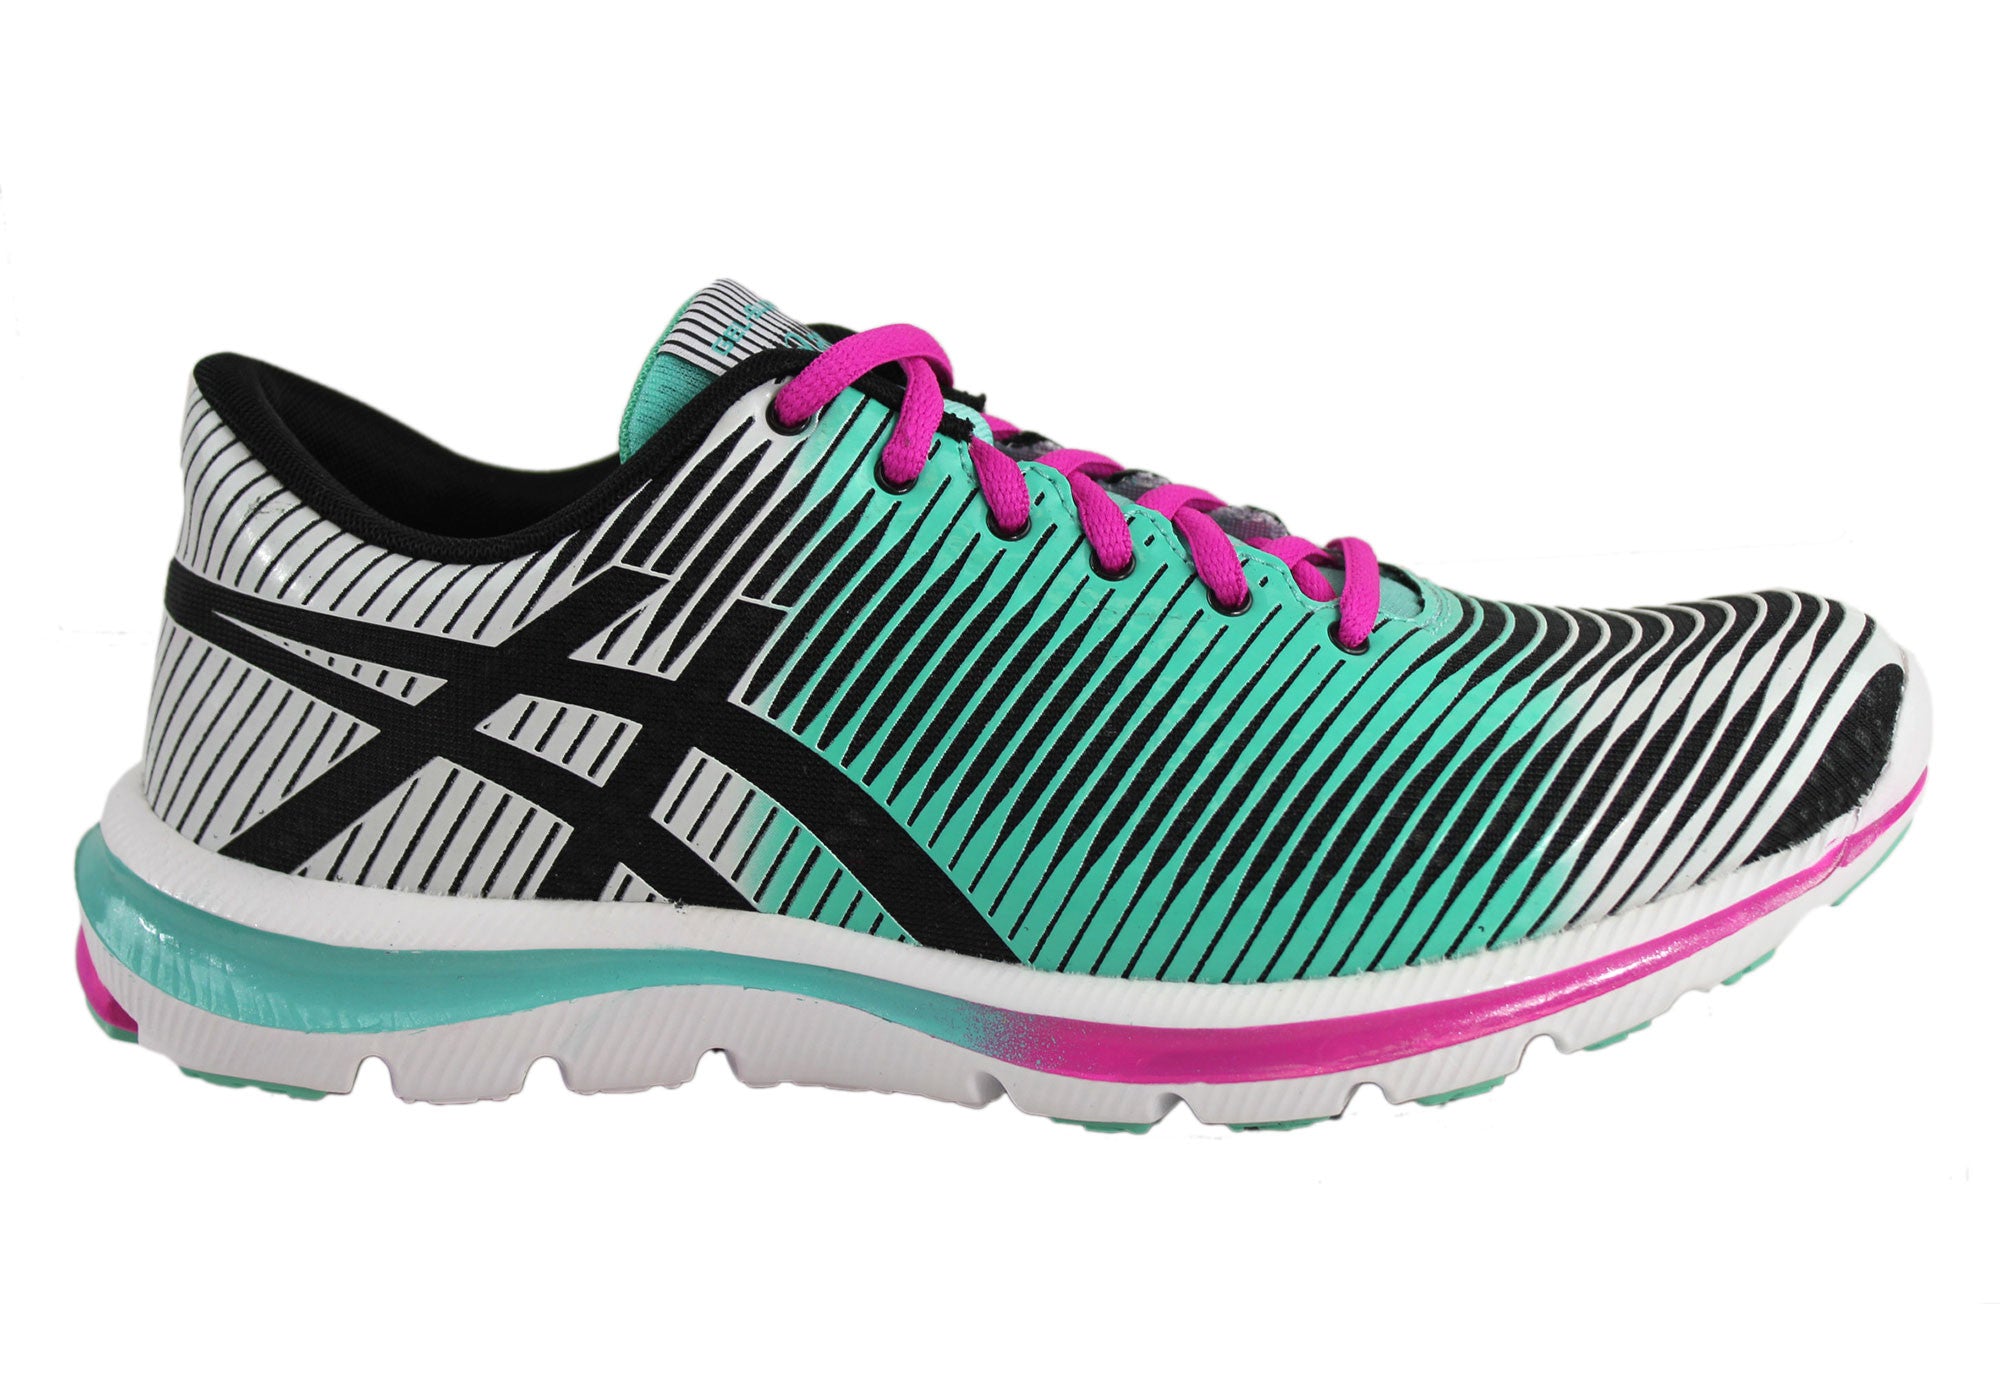 asics fluidaxis womens, OFF 71%,welcome 